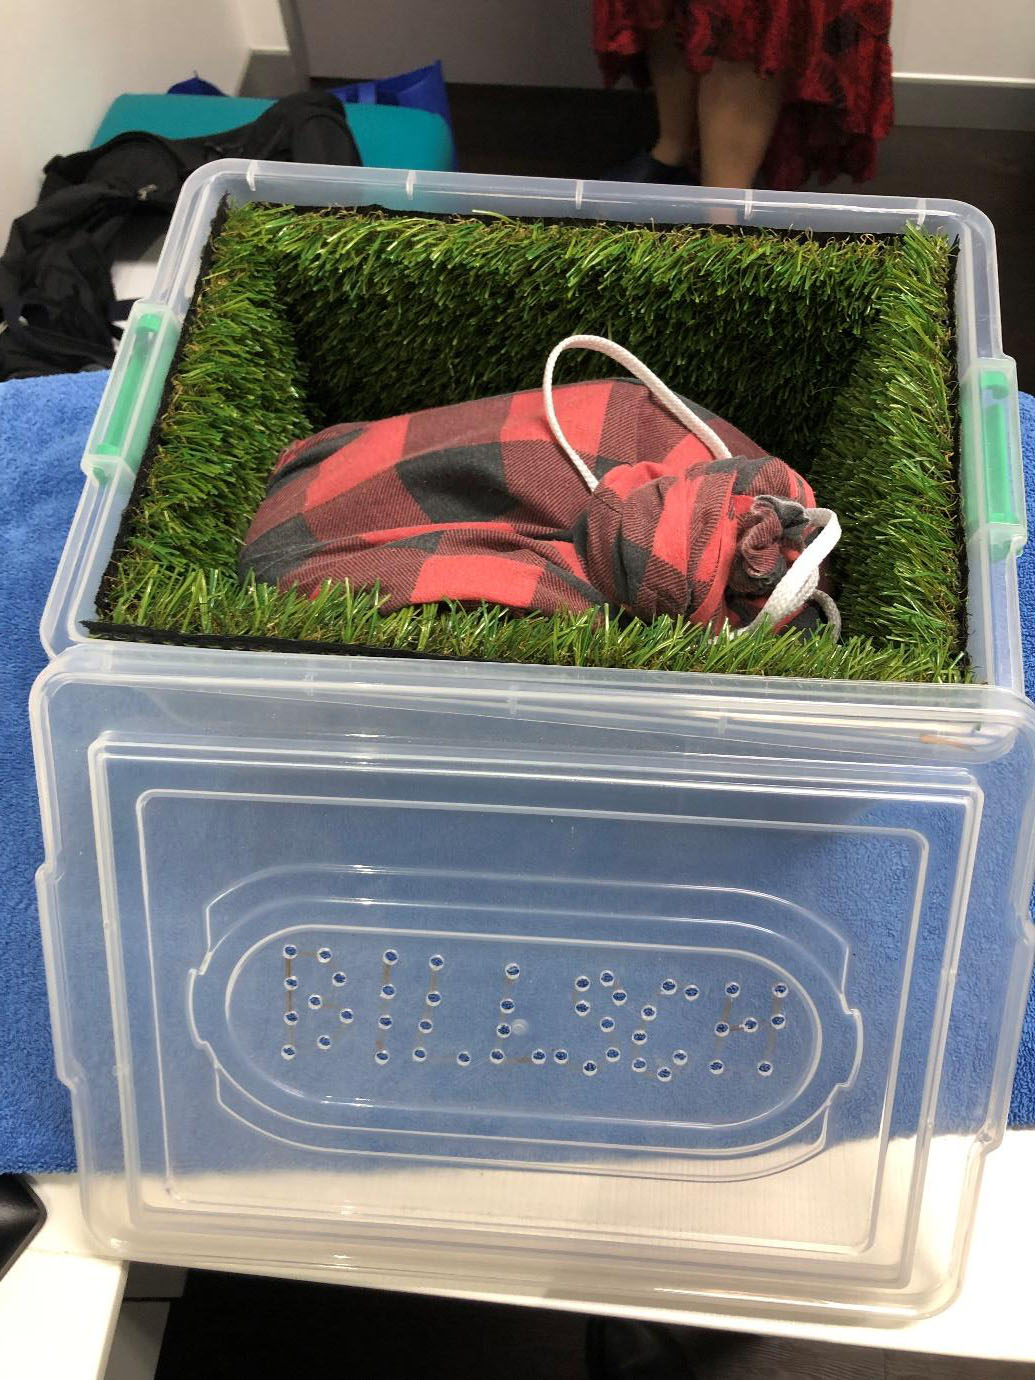 How to Safely Transport Reptiles to the Vet - This snake is secured in his very own pillow case, he is then placed in a plastic container lined with soft astroturf